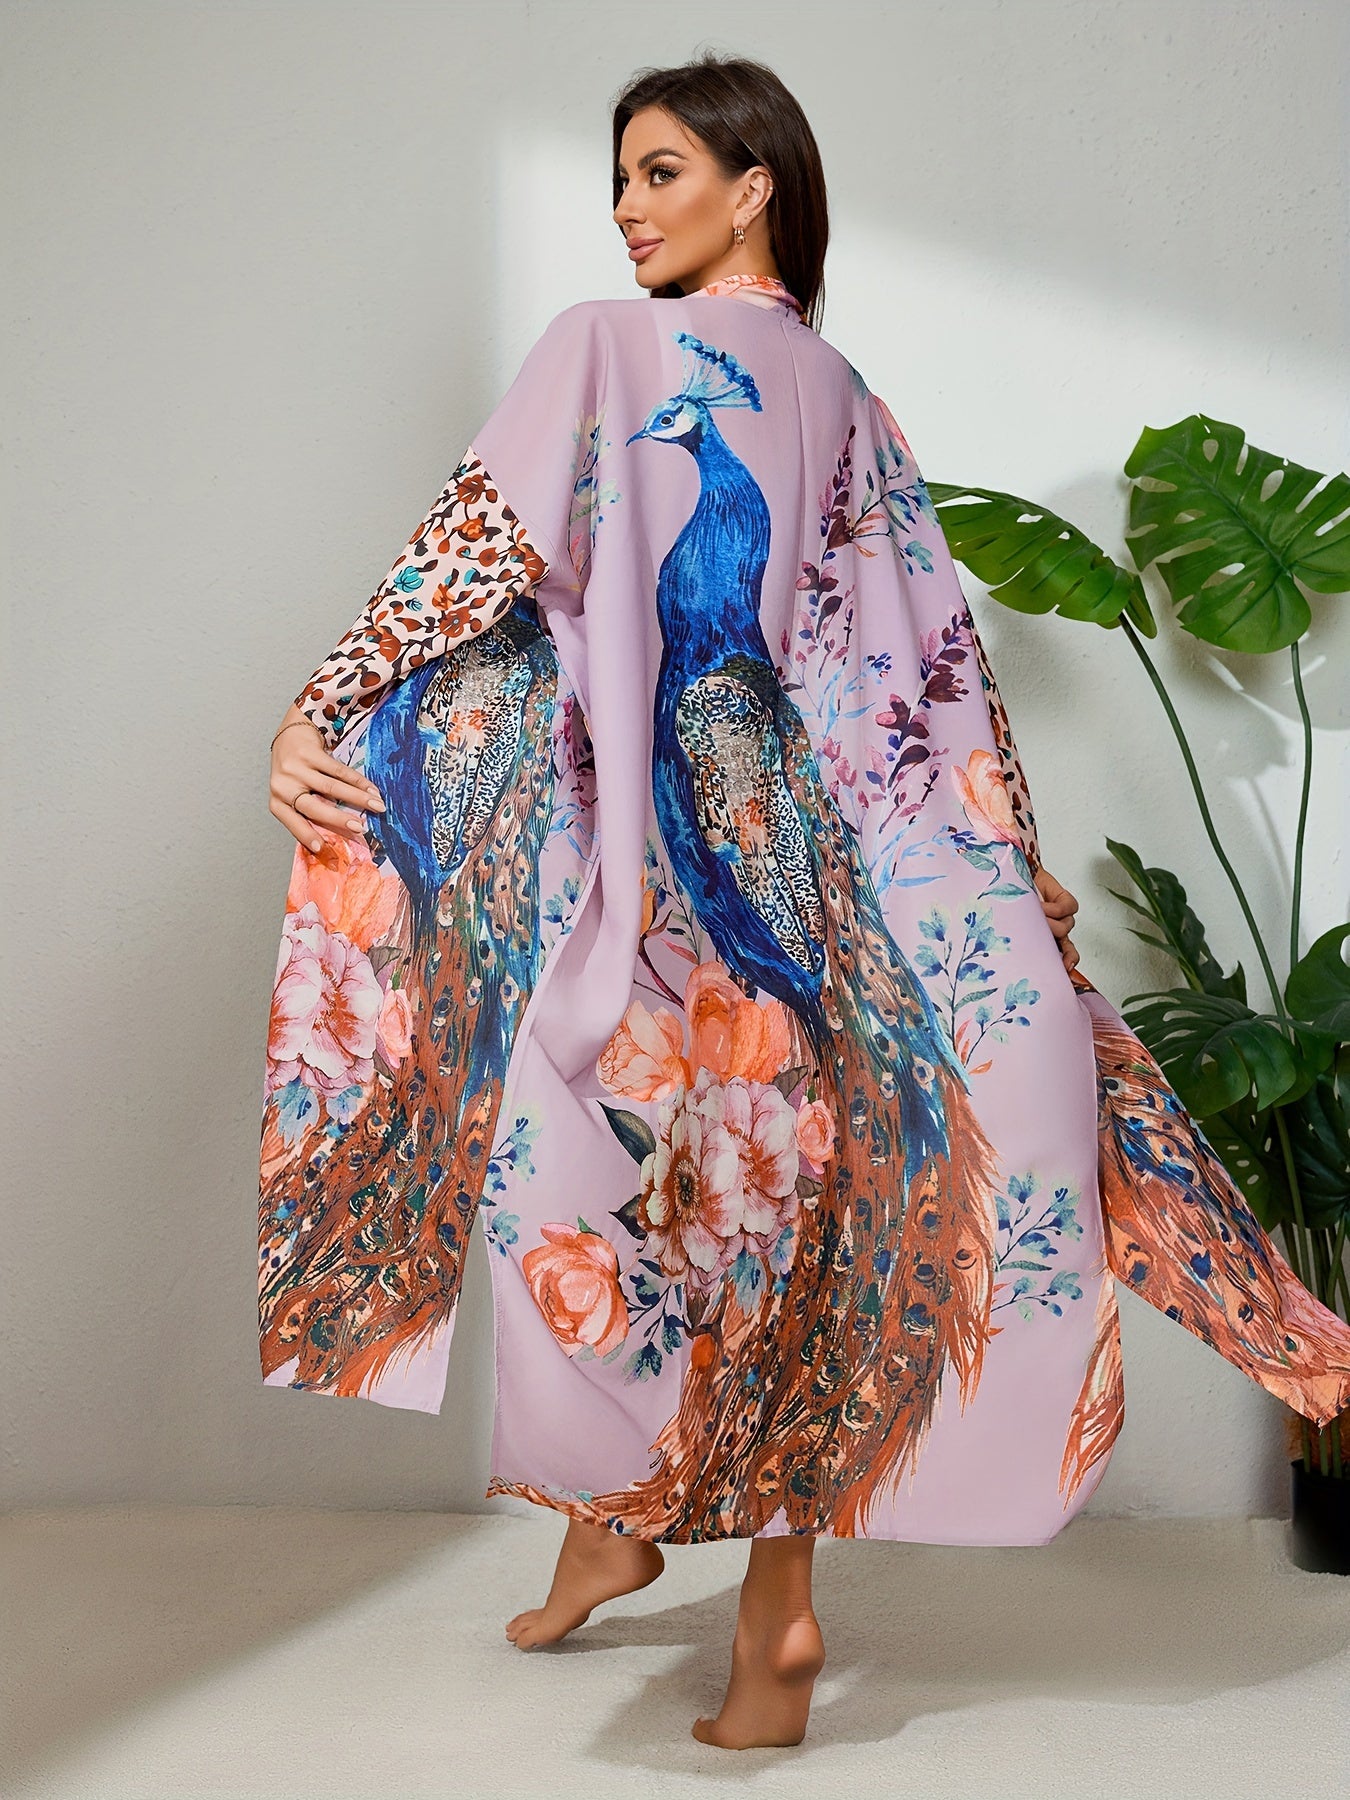 A woman is wearing a Maramalive™ Bohemian Style Women's Peacock Print Beach Cover-Up With Belt, Long Sleeves Loose Fit Vacation Kimono. She is standing barefoot on a light-colored floor next to a green leafy plant.